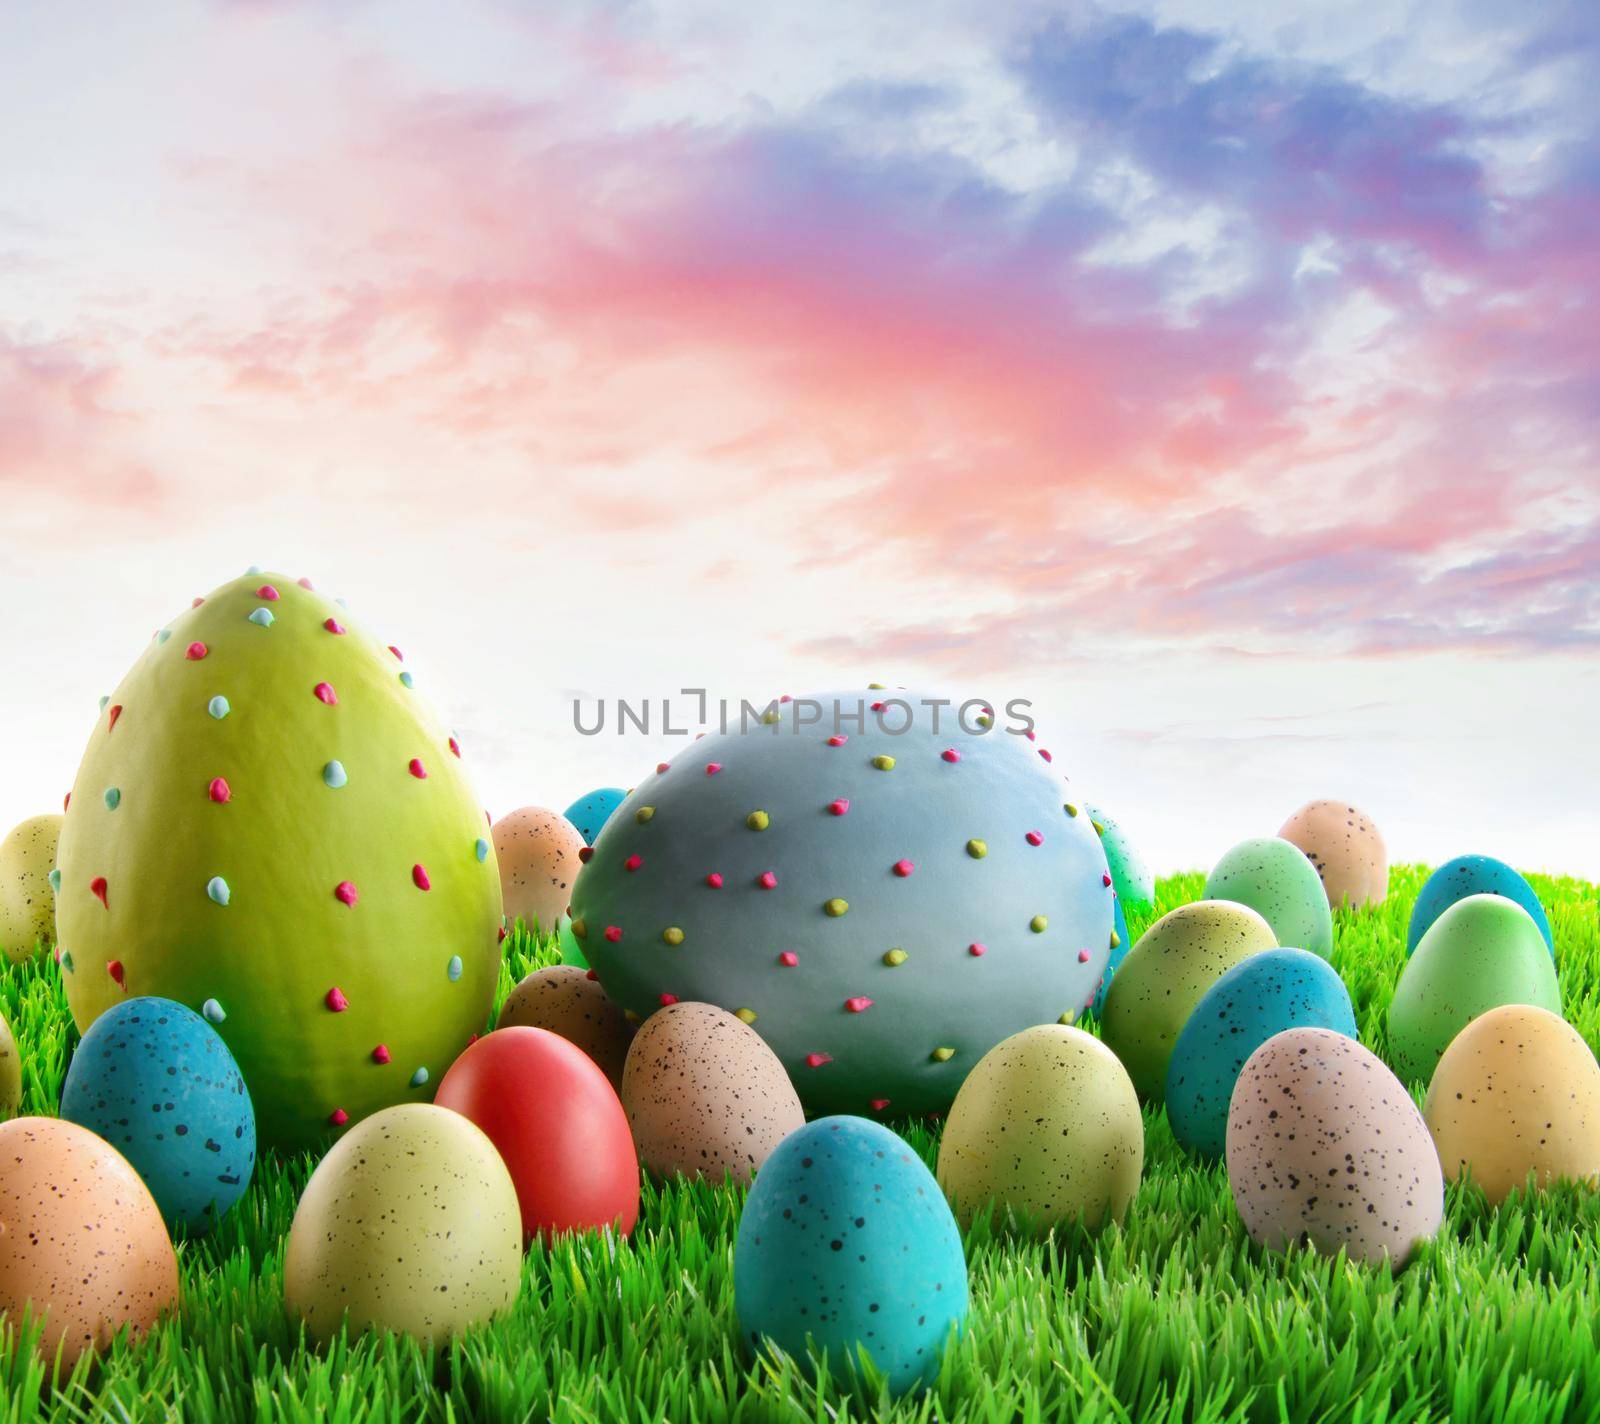 Colorful decorated eggs in the grass by Sandralise